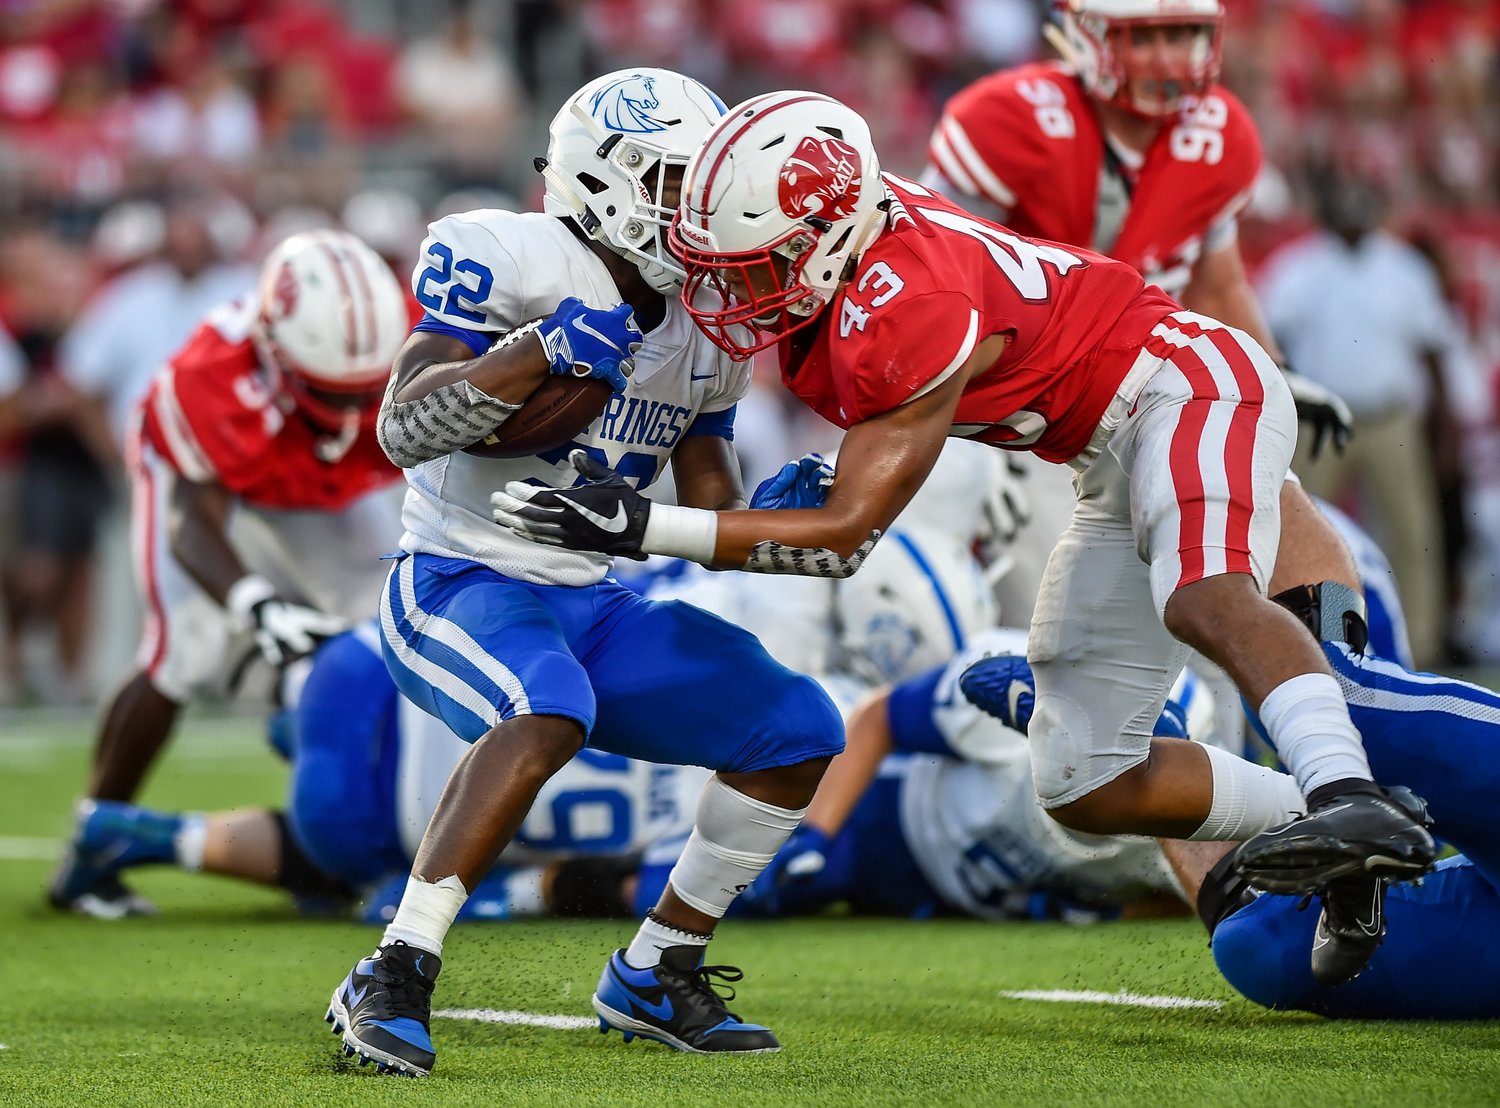 Katy, Tx. - Sept 21, 2019:  Katy's Dalton Johnson (43) makes the stop on Clear Springs Kaleb Hymes #22 during a game with Clear Springs at Legacy Stadium in Katy. (Photo by Mark Goodman / Katy Times)